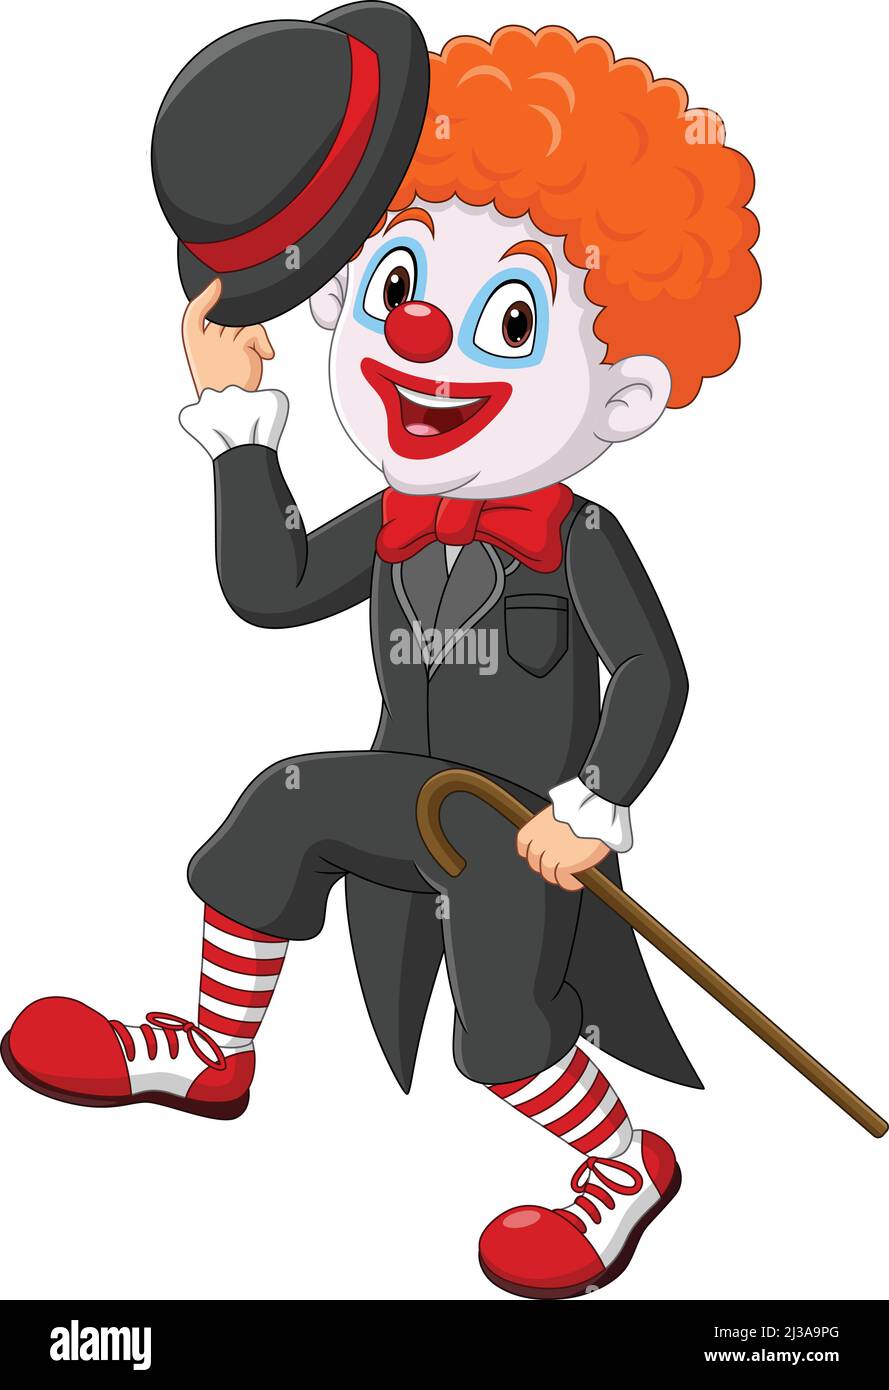 Cartoon clown with hat and stick Stock Vector